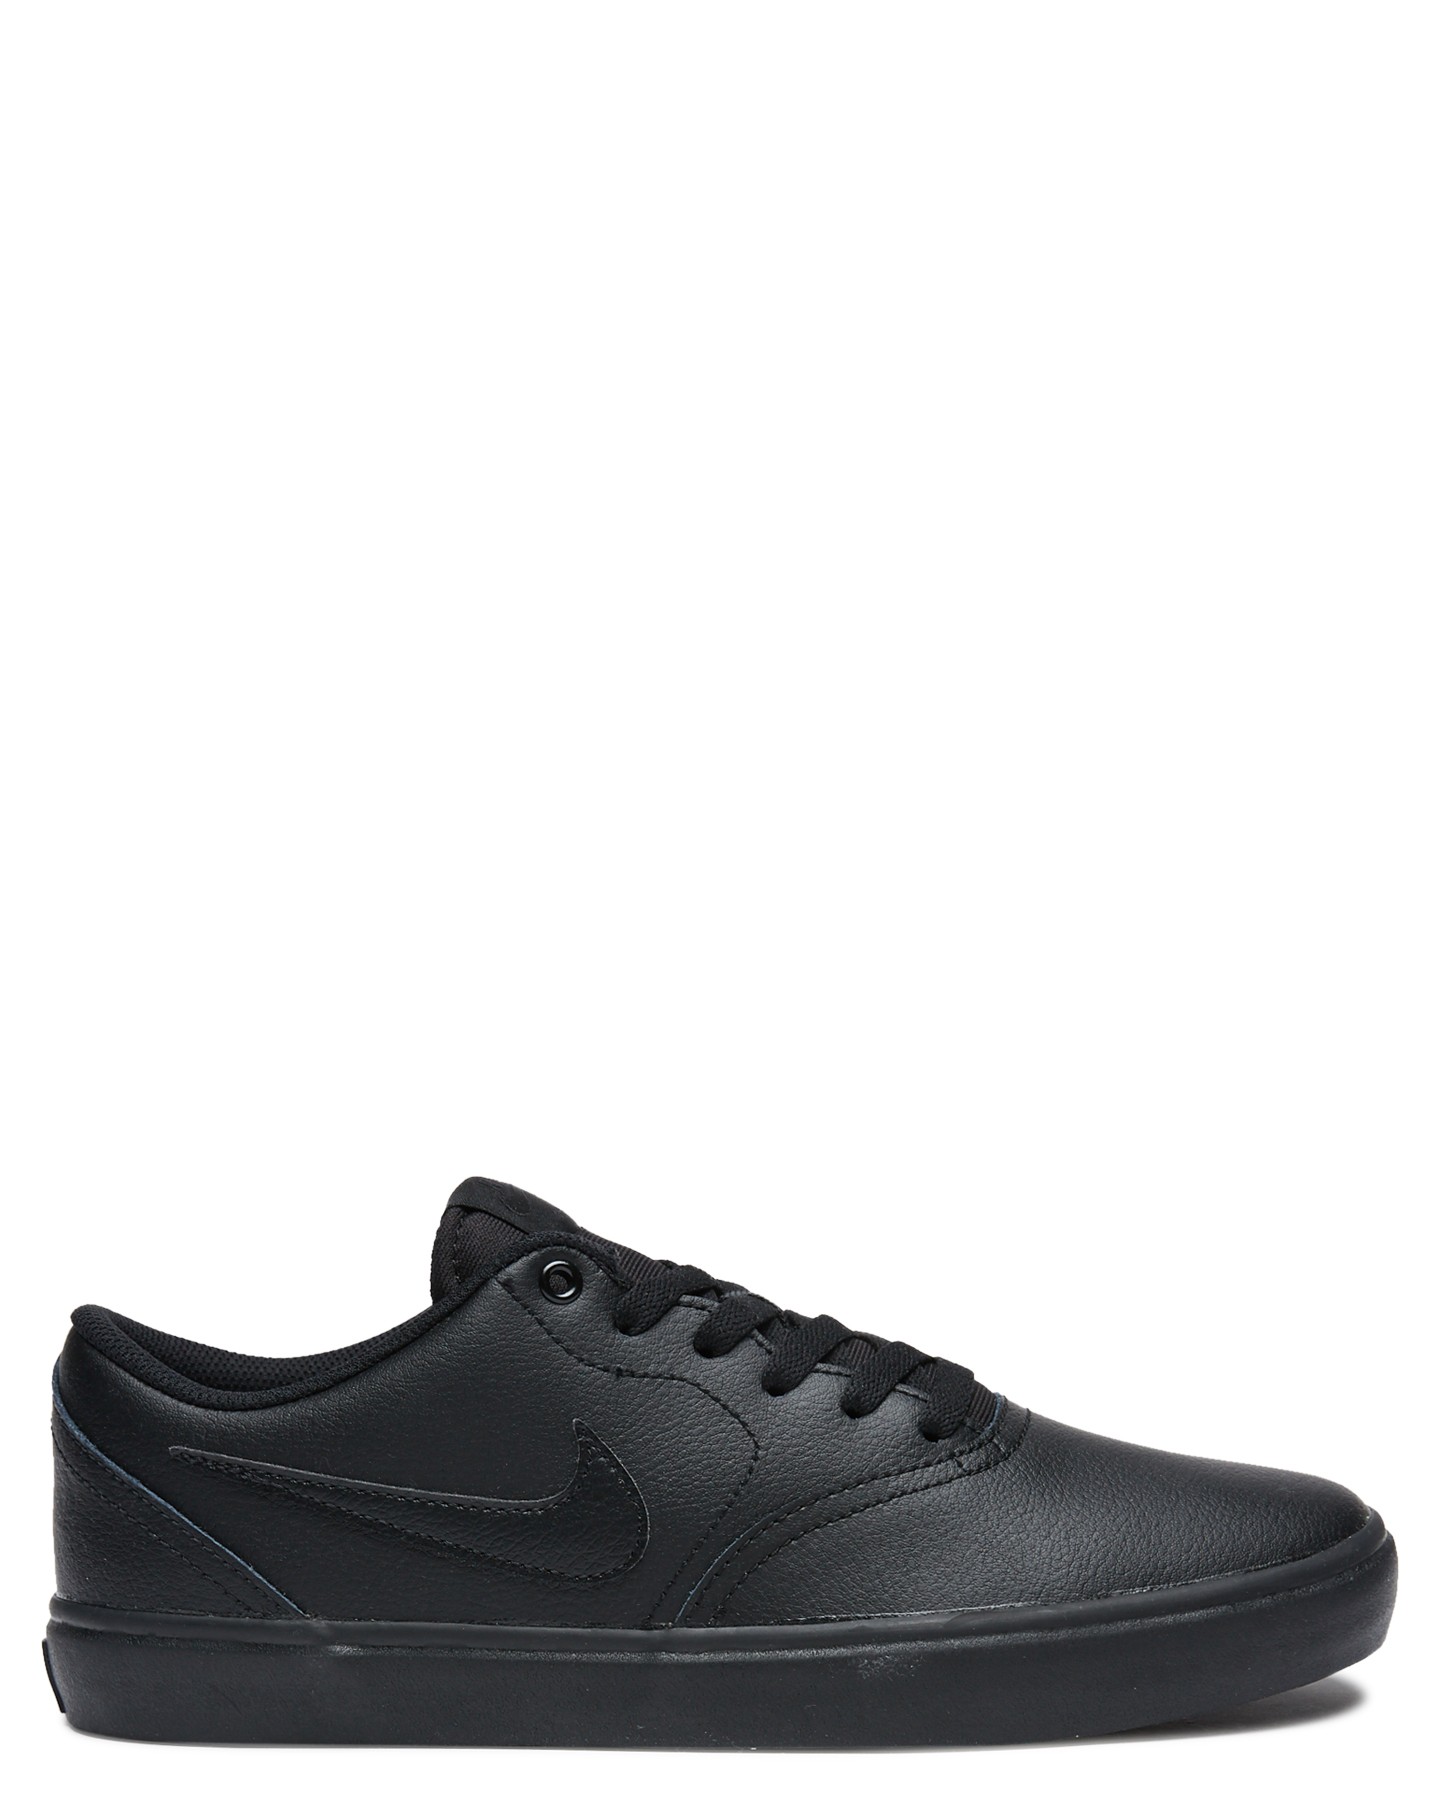 mens black leather nike shoes